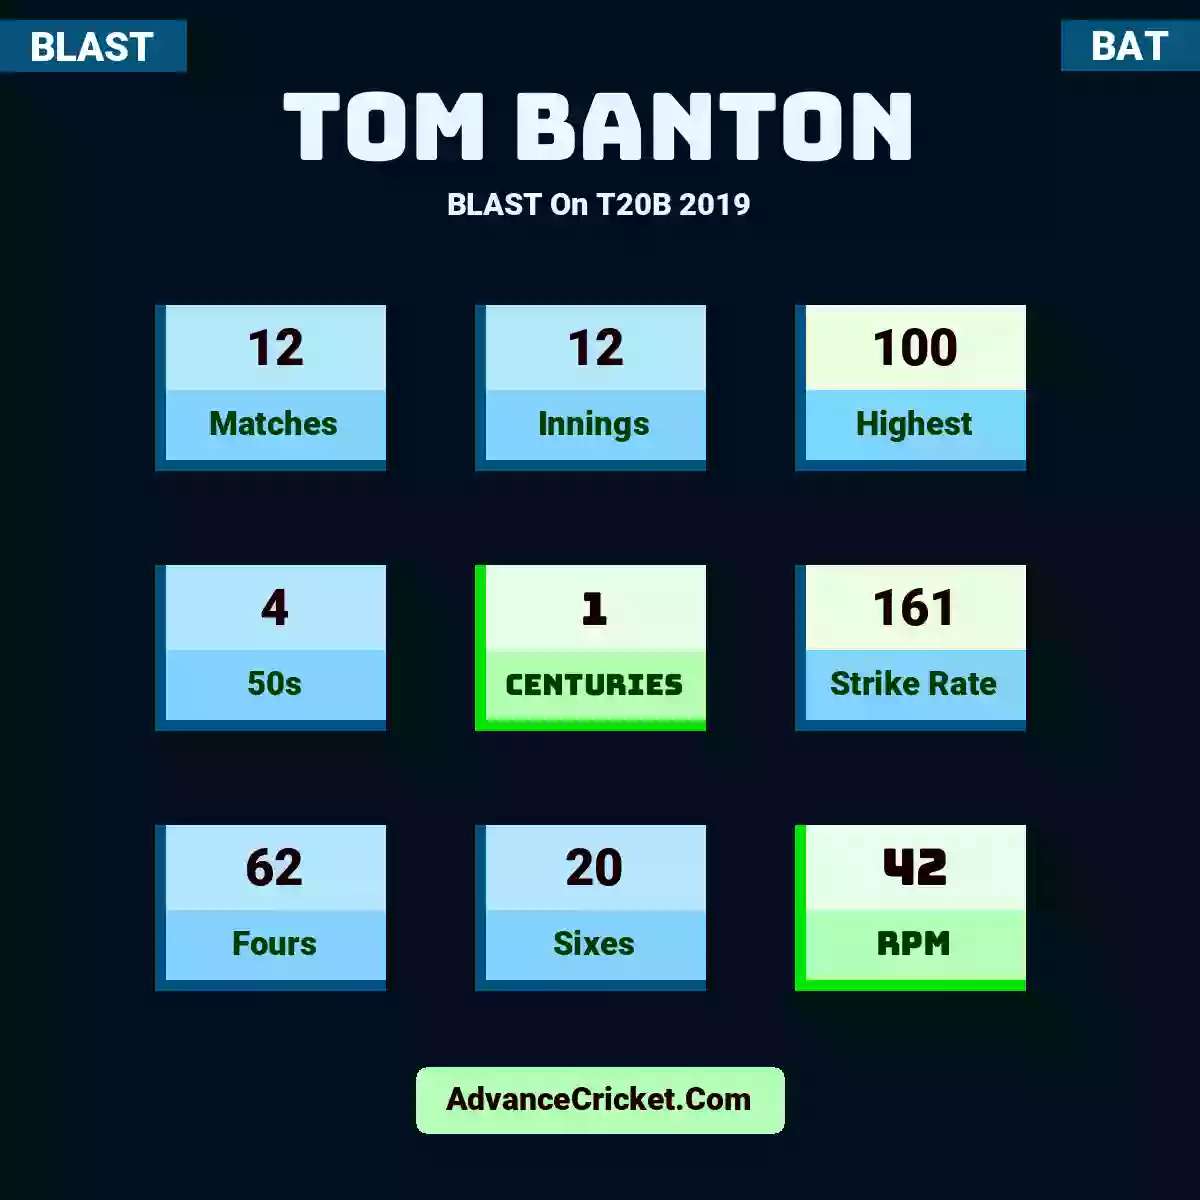 Tom Banton BLAST  On T20B 2019, Tom Banton played 12 matches, scored 100 runs as highest, 4 half-centuries, and 1 centuries, with a strike rate of 161. T.Banton hit 62 fours and 20 sixes, with an RPM of 42.